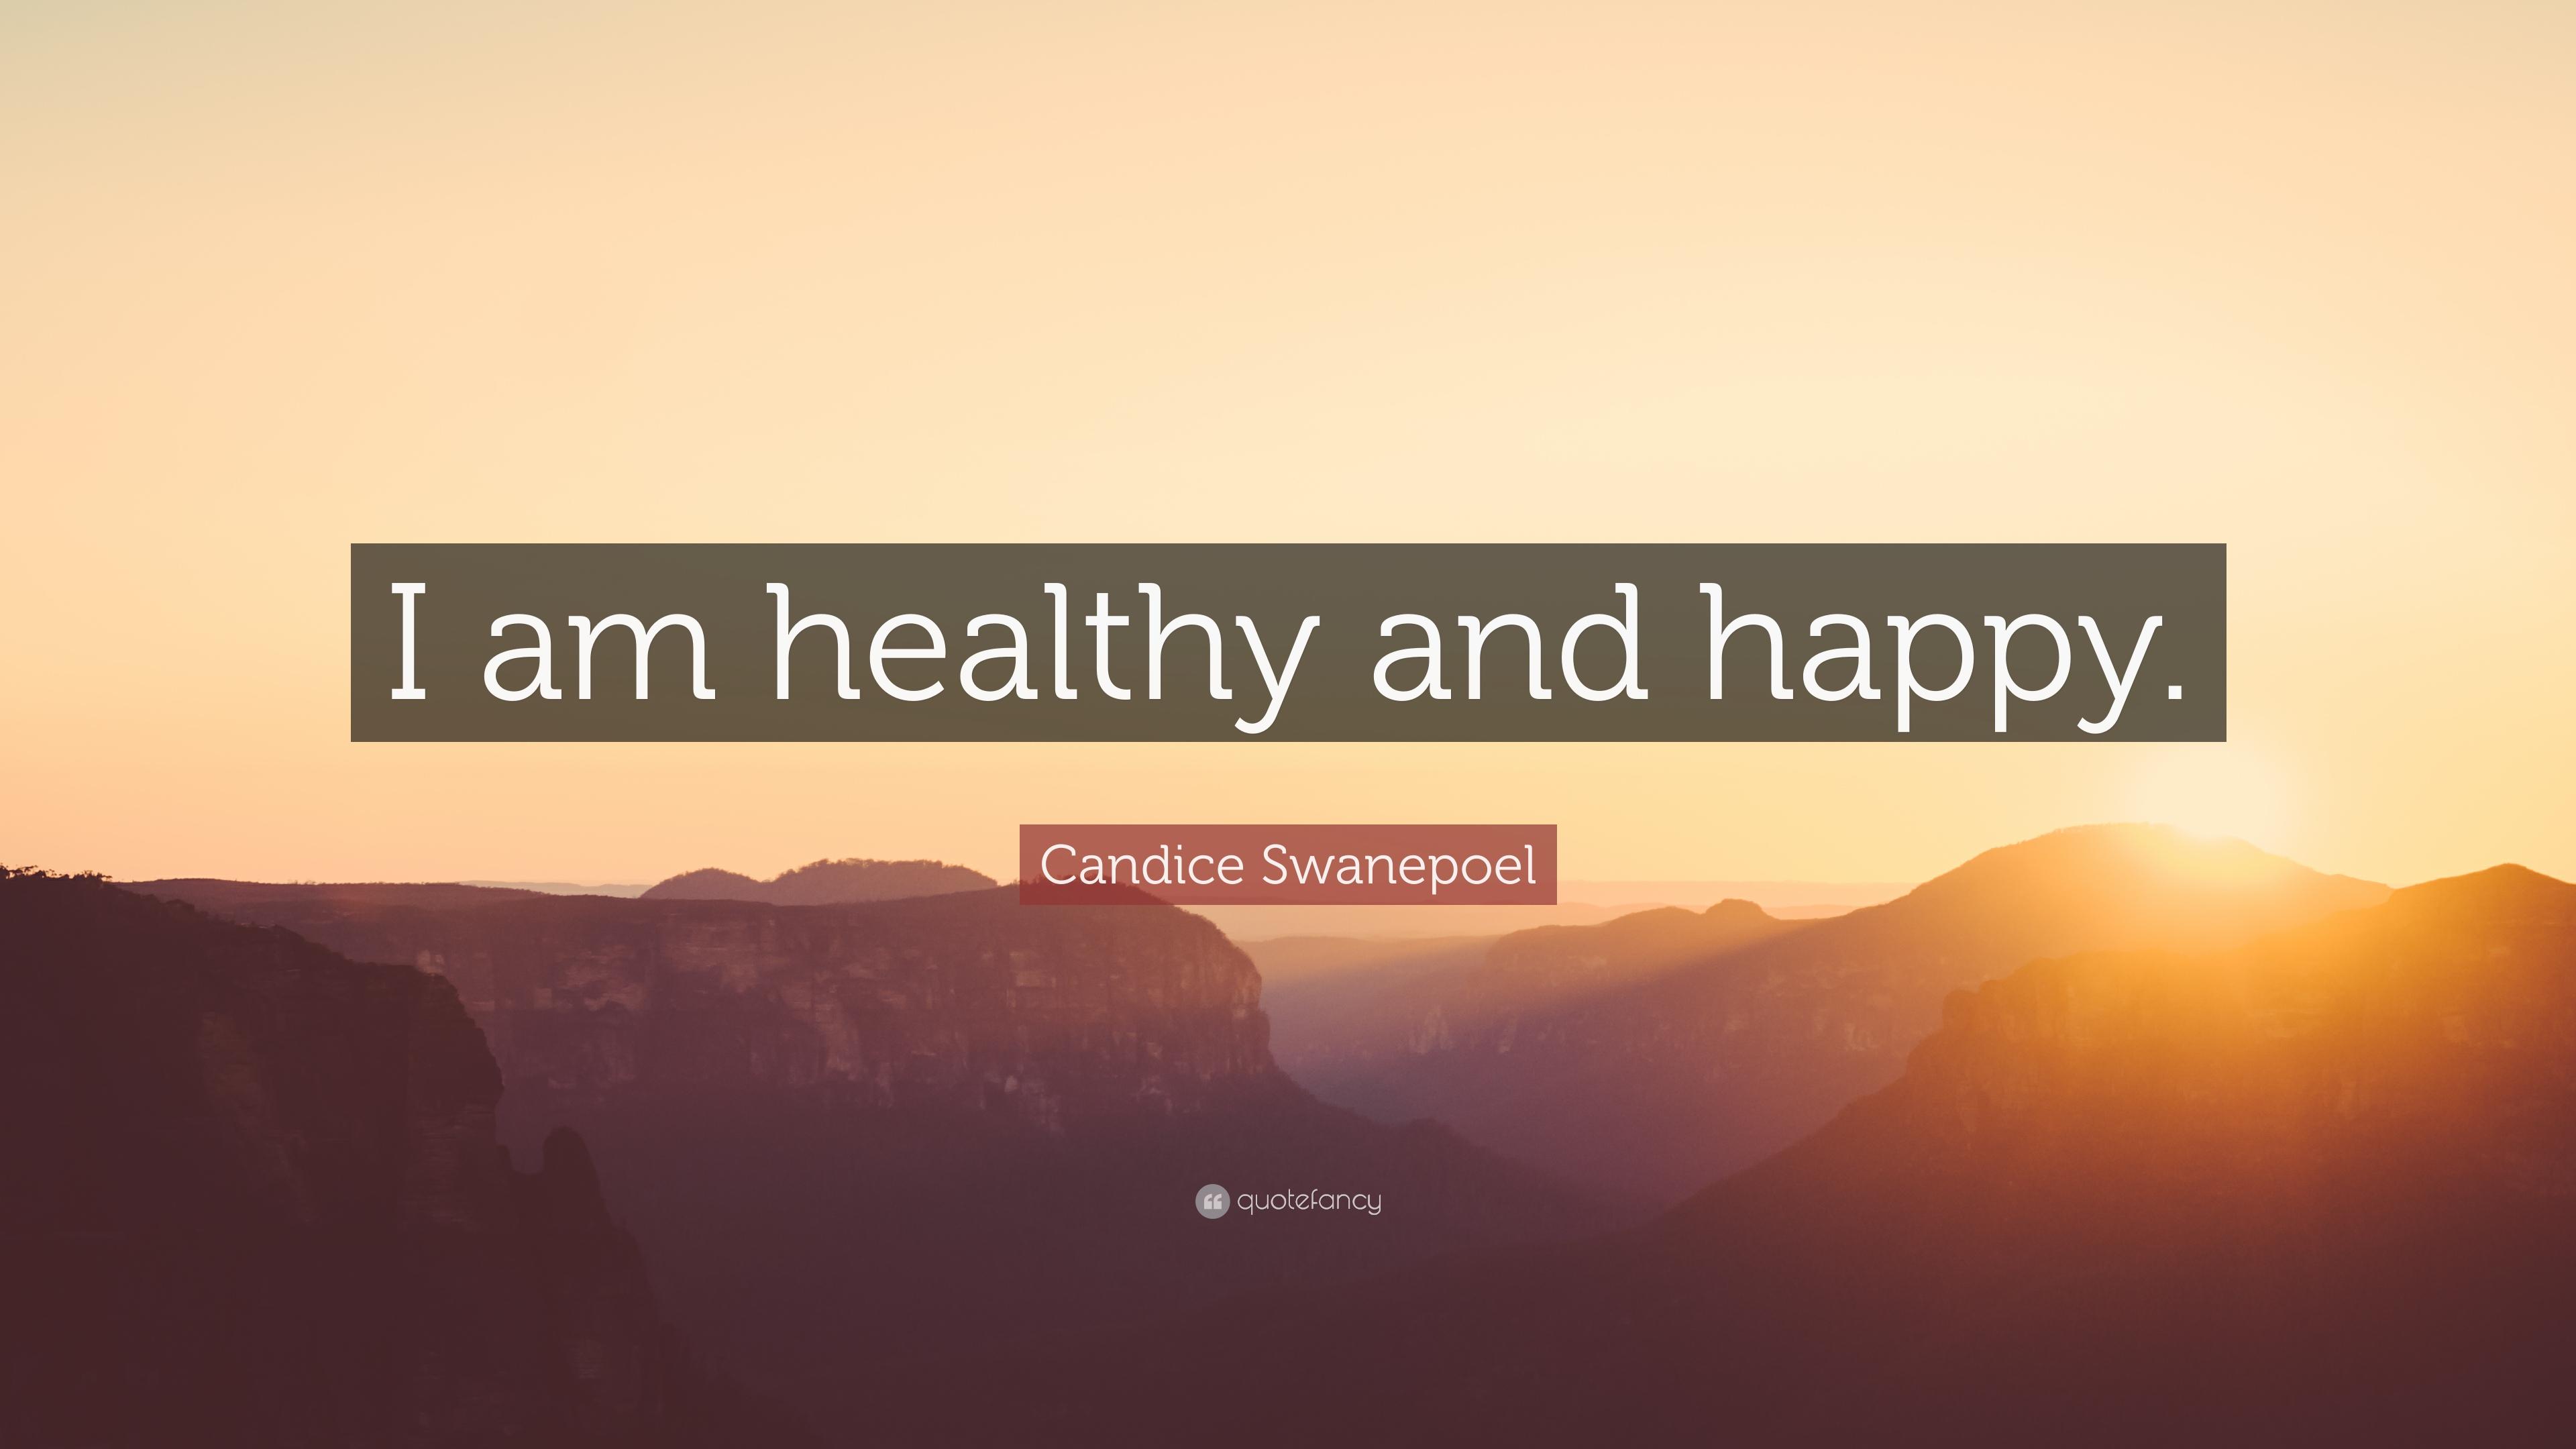 Candice Swanepoel Quote: “I am healthy and happy.” 7 wallpaper